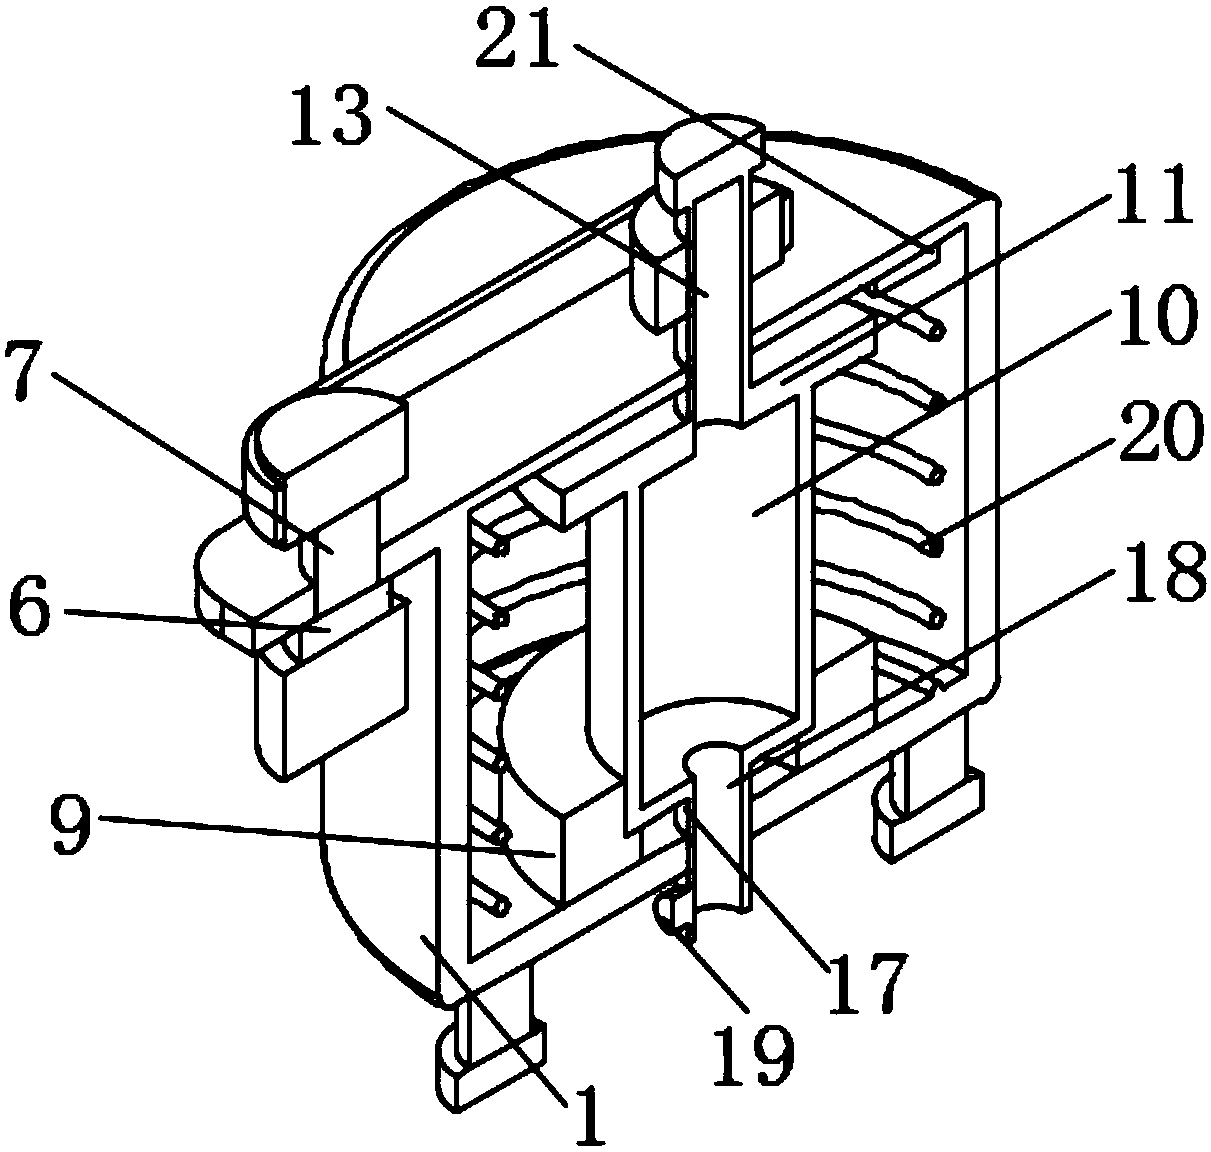 Blood stem cell collecting device